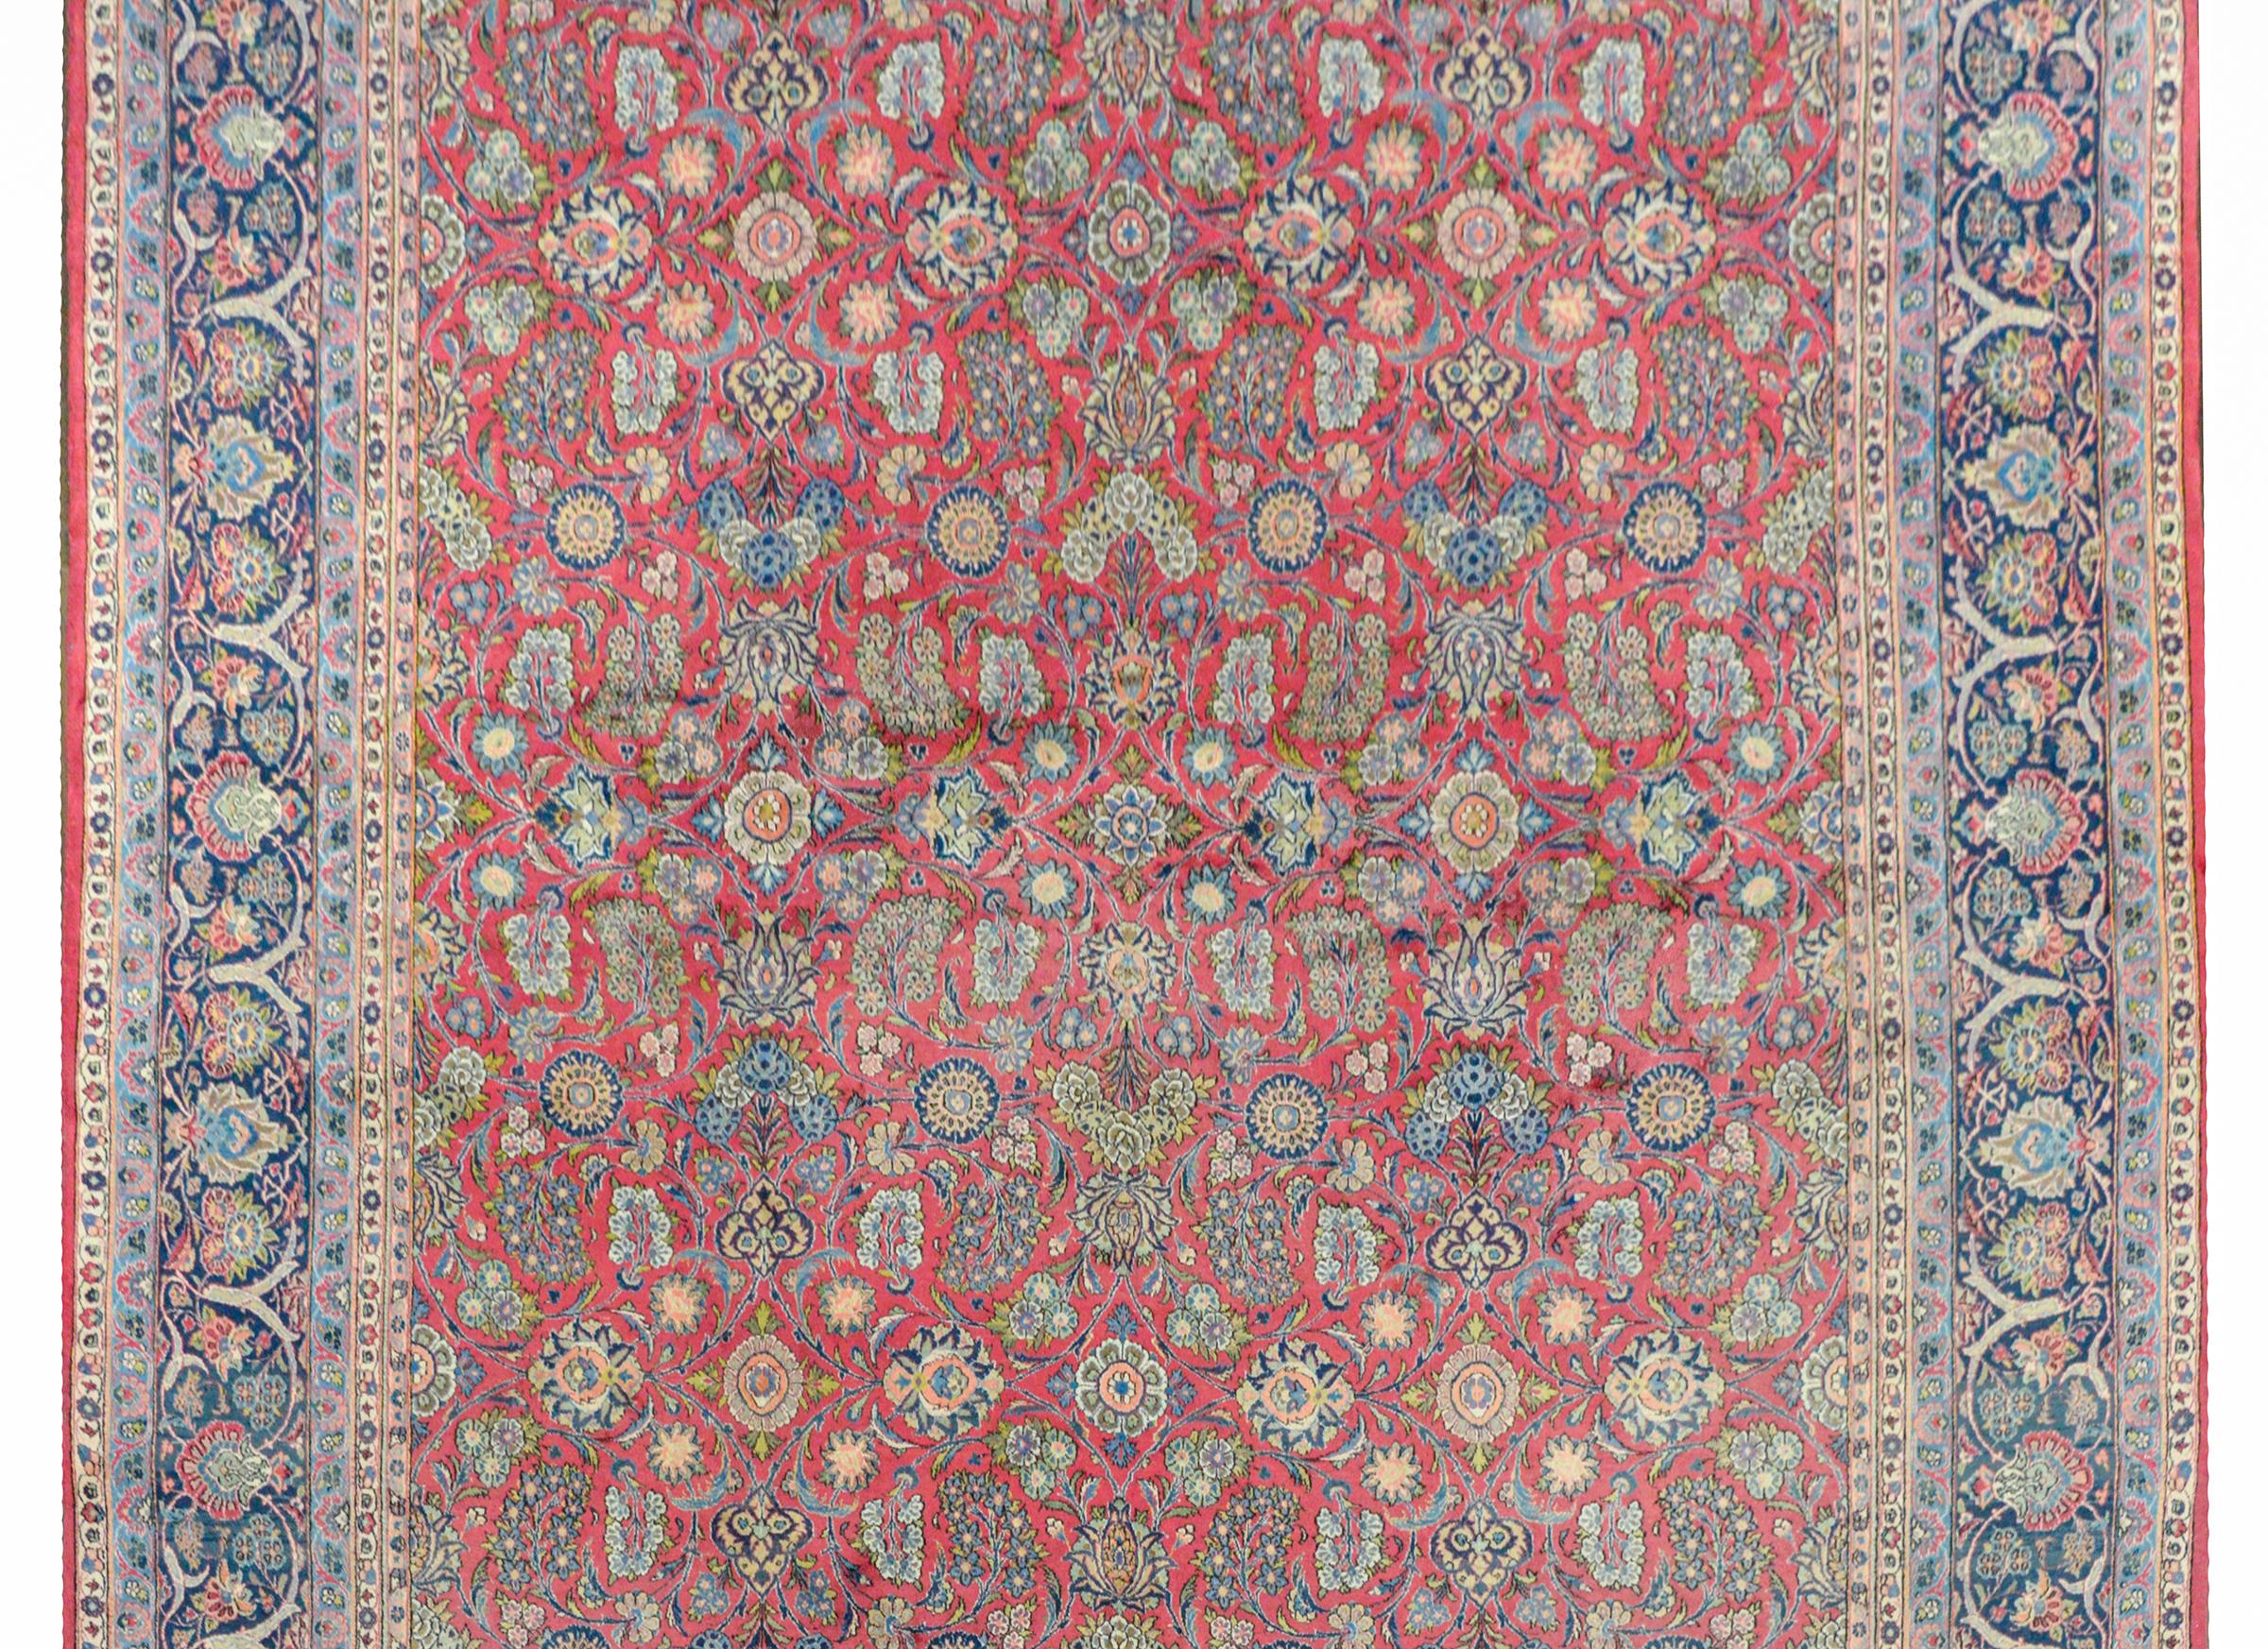 A wonderful early 20th century Persian Kashan Dabir rug with a fantastic all-over mirrored pattern containing myriad flower varieties woven in light and dark indigo, cream, dark and light green, orange, and pink, all on a cranberry background. The